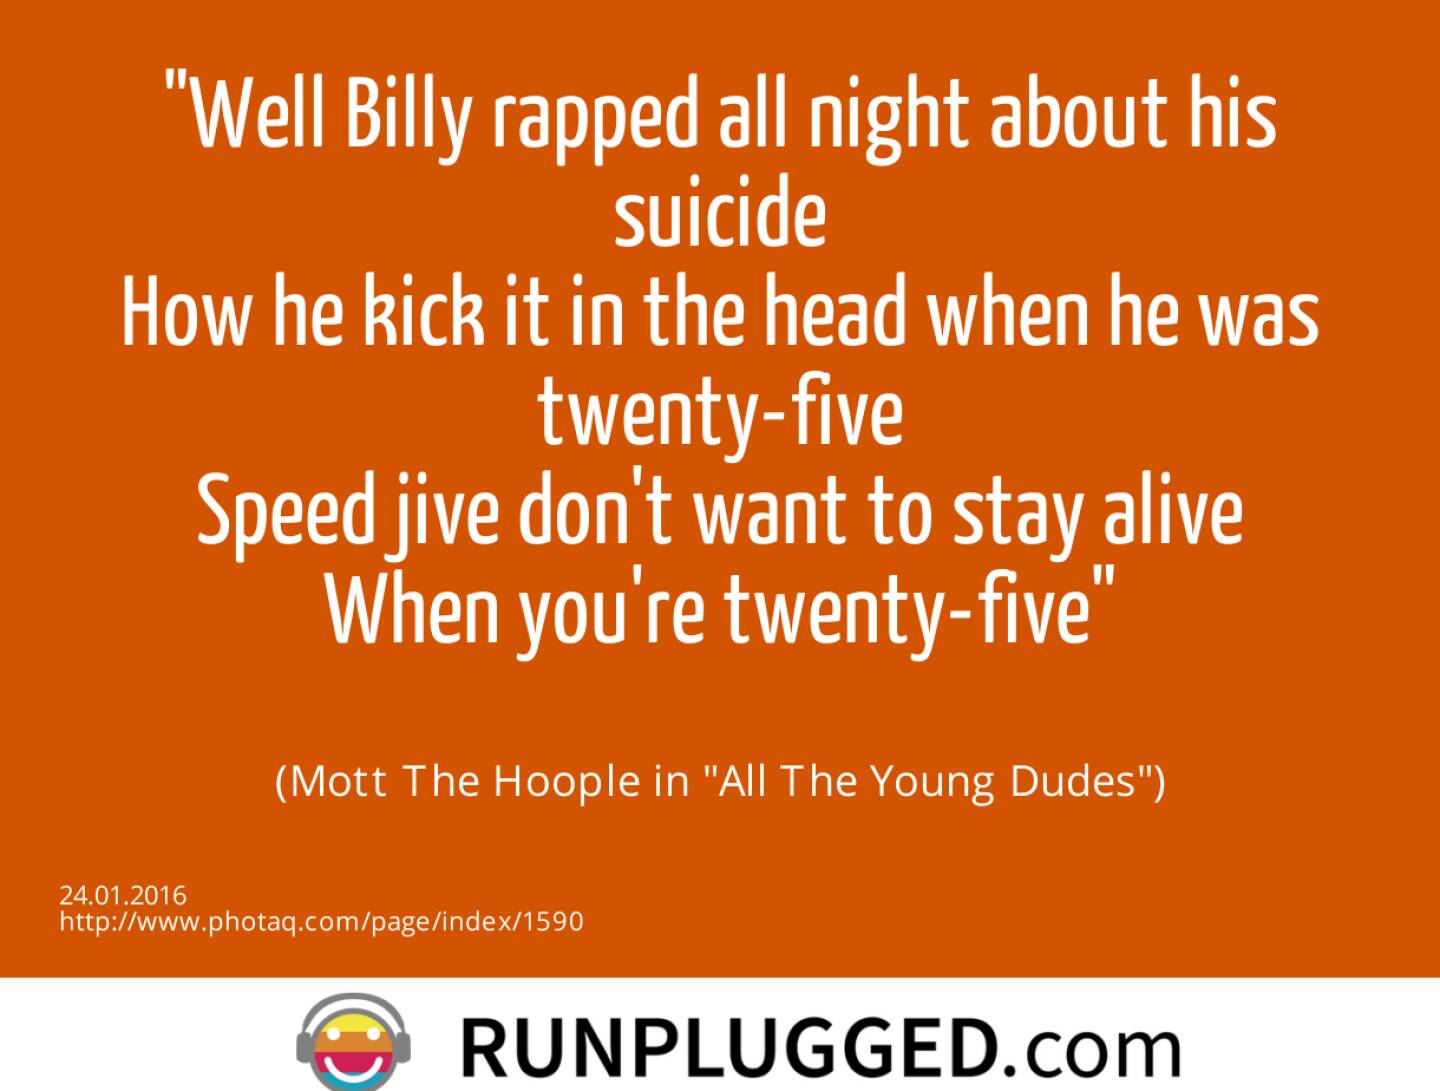 Well Billy rapped all night about his suicide<br>How he kick it in the head when he was twenty-five<br>Speed jive don't want to stay alive<br>When you're twenty-five<br><br> (Mott The Hoople in All The Young Dudes)